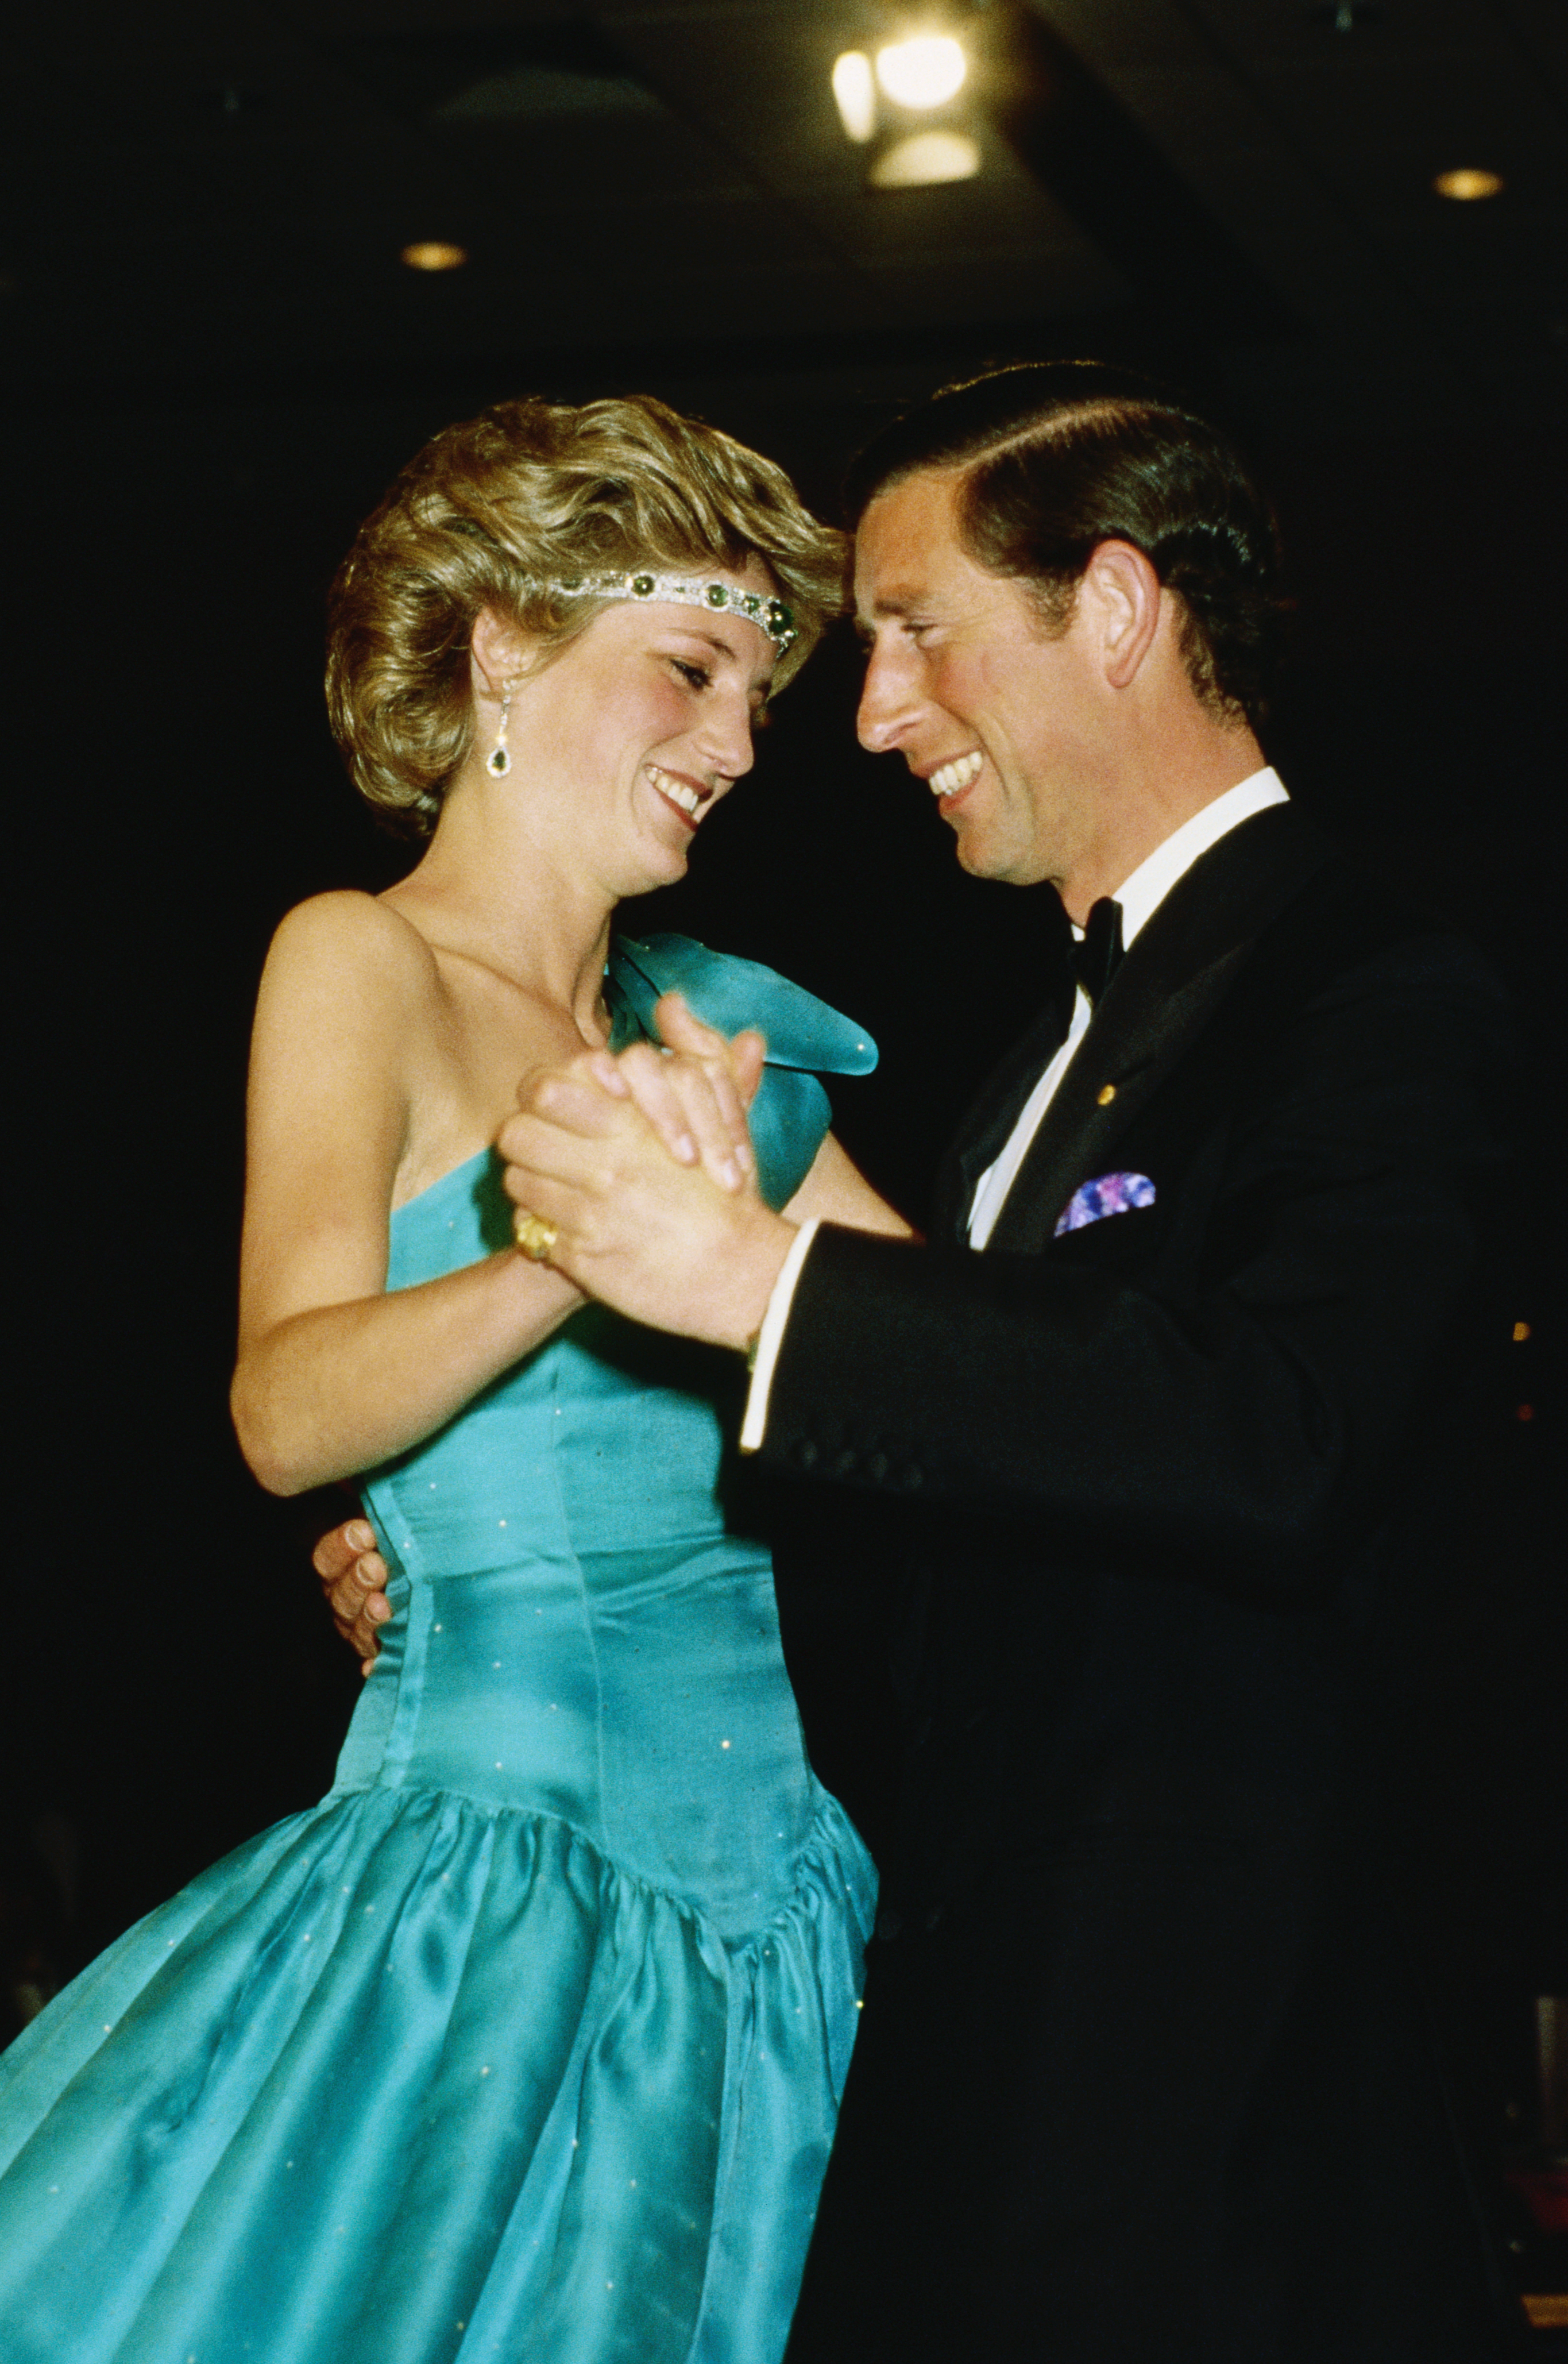 Princess Diana and Prince Charles dance at a formal event